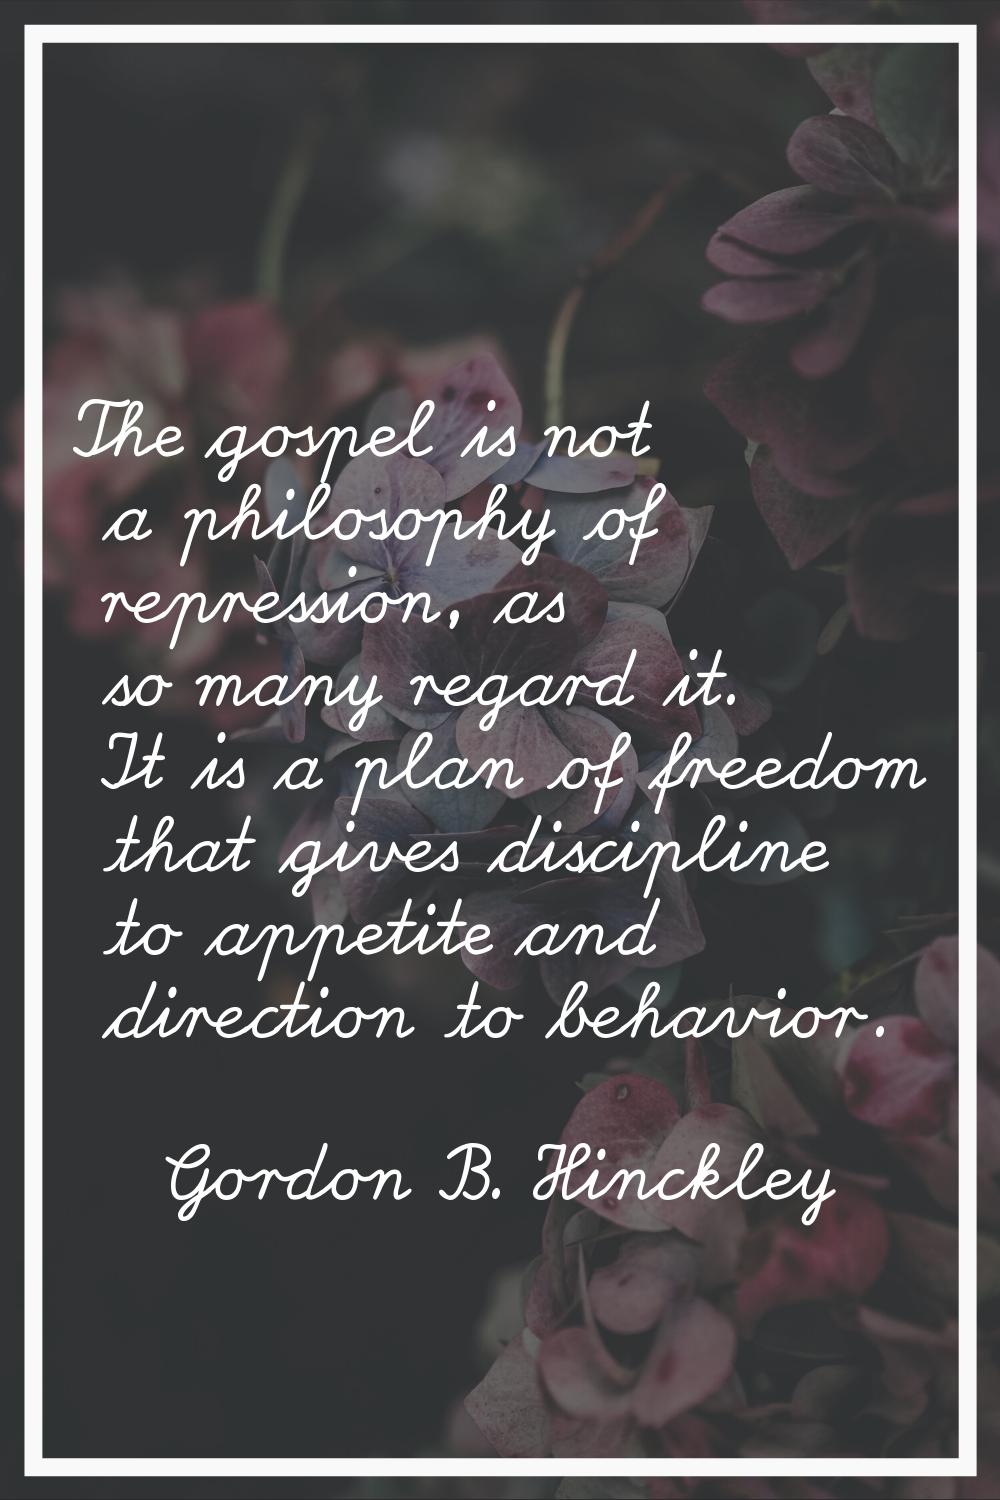 The gospel is not a philosophy of repression, as so many regard it. It is a plan of freedom that gi